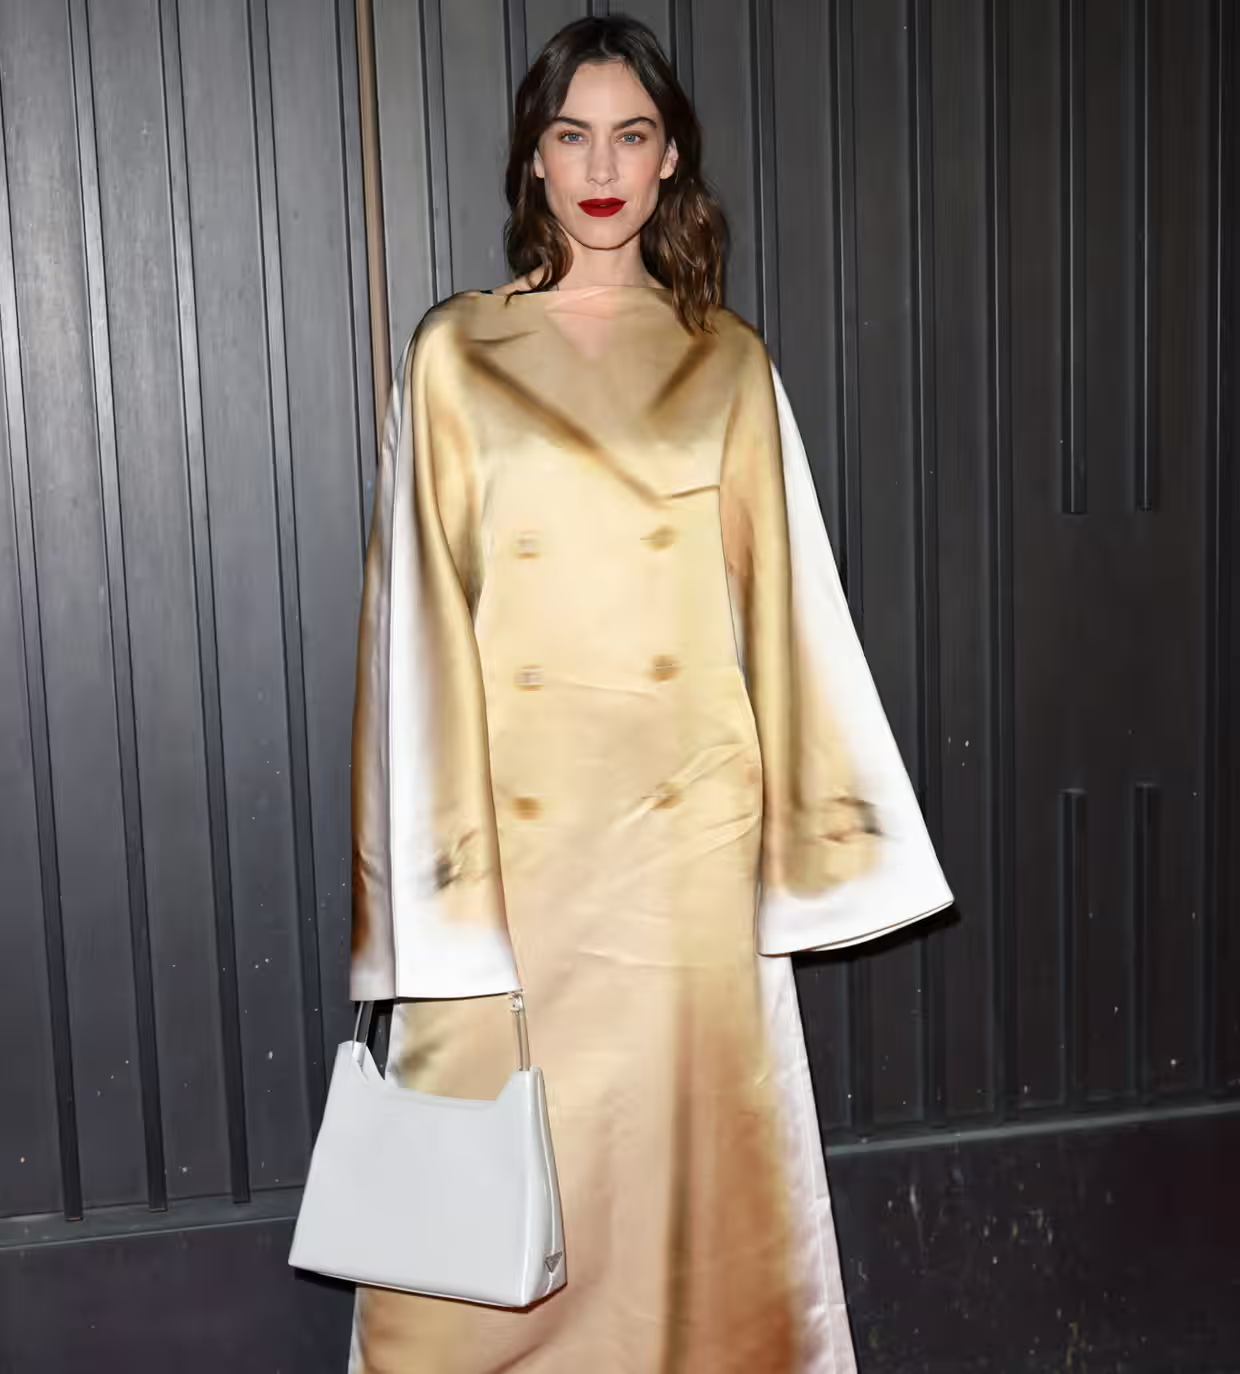 Alexa Chung wearing oversized sleeves at British Vogue's 2023 ‘Forces for Change’ party in London last week Photograph: Karwai Tang/WireImage